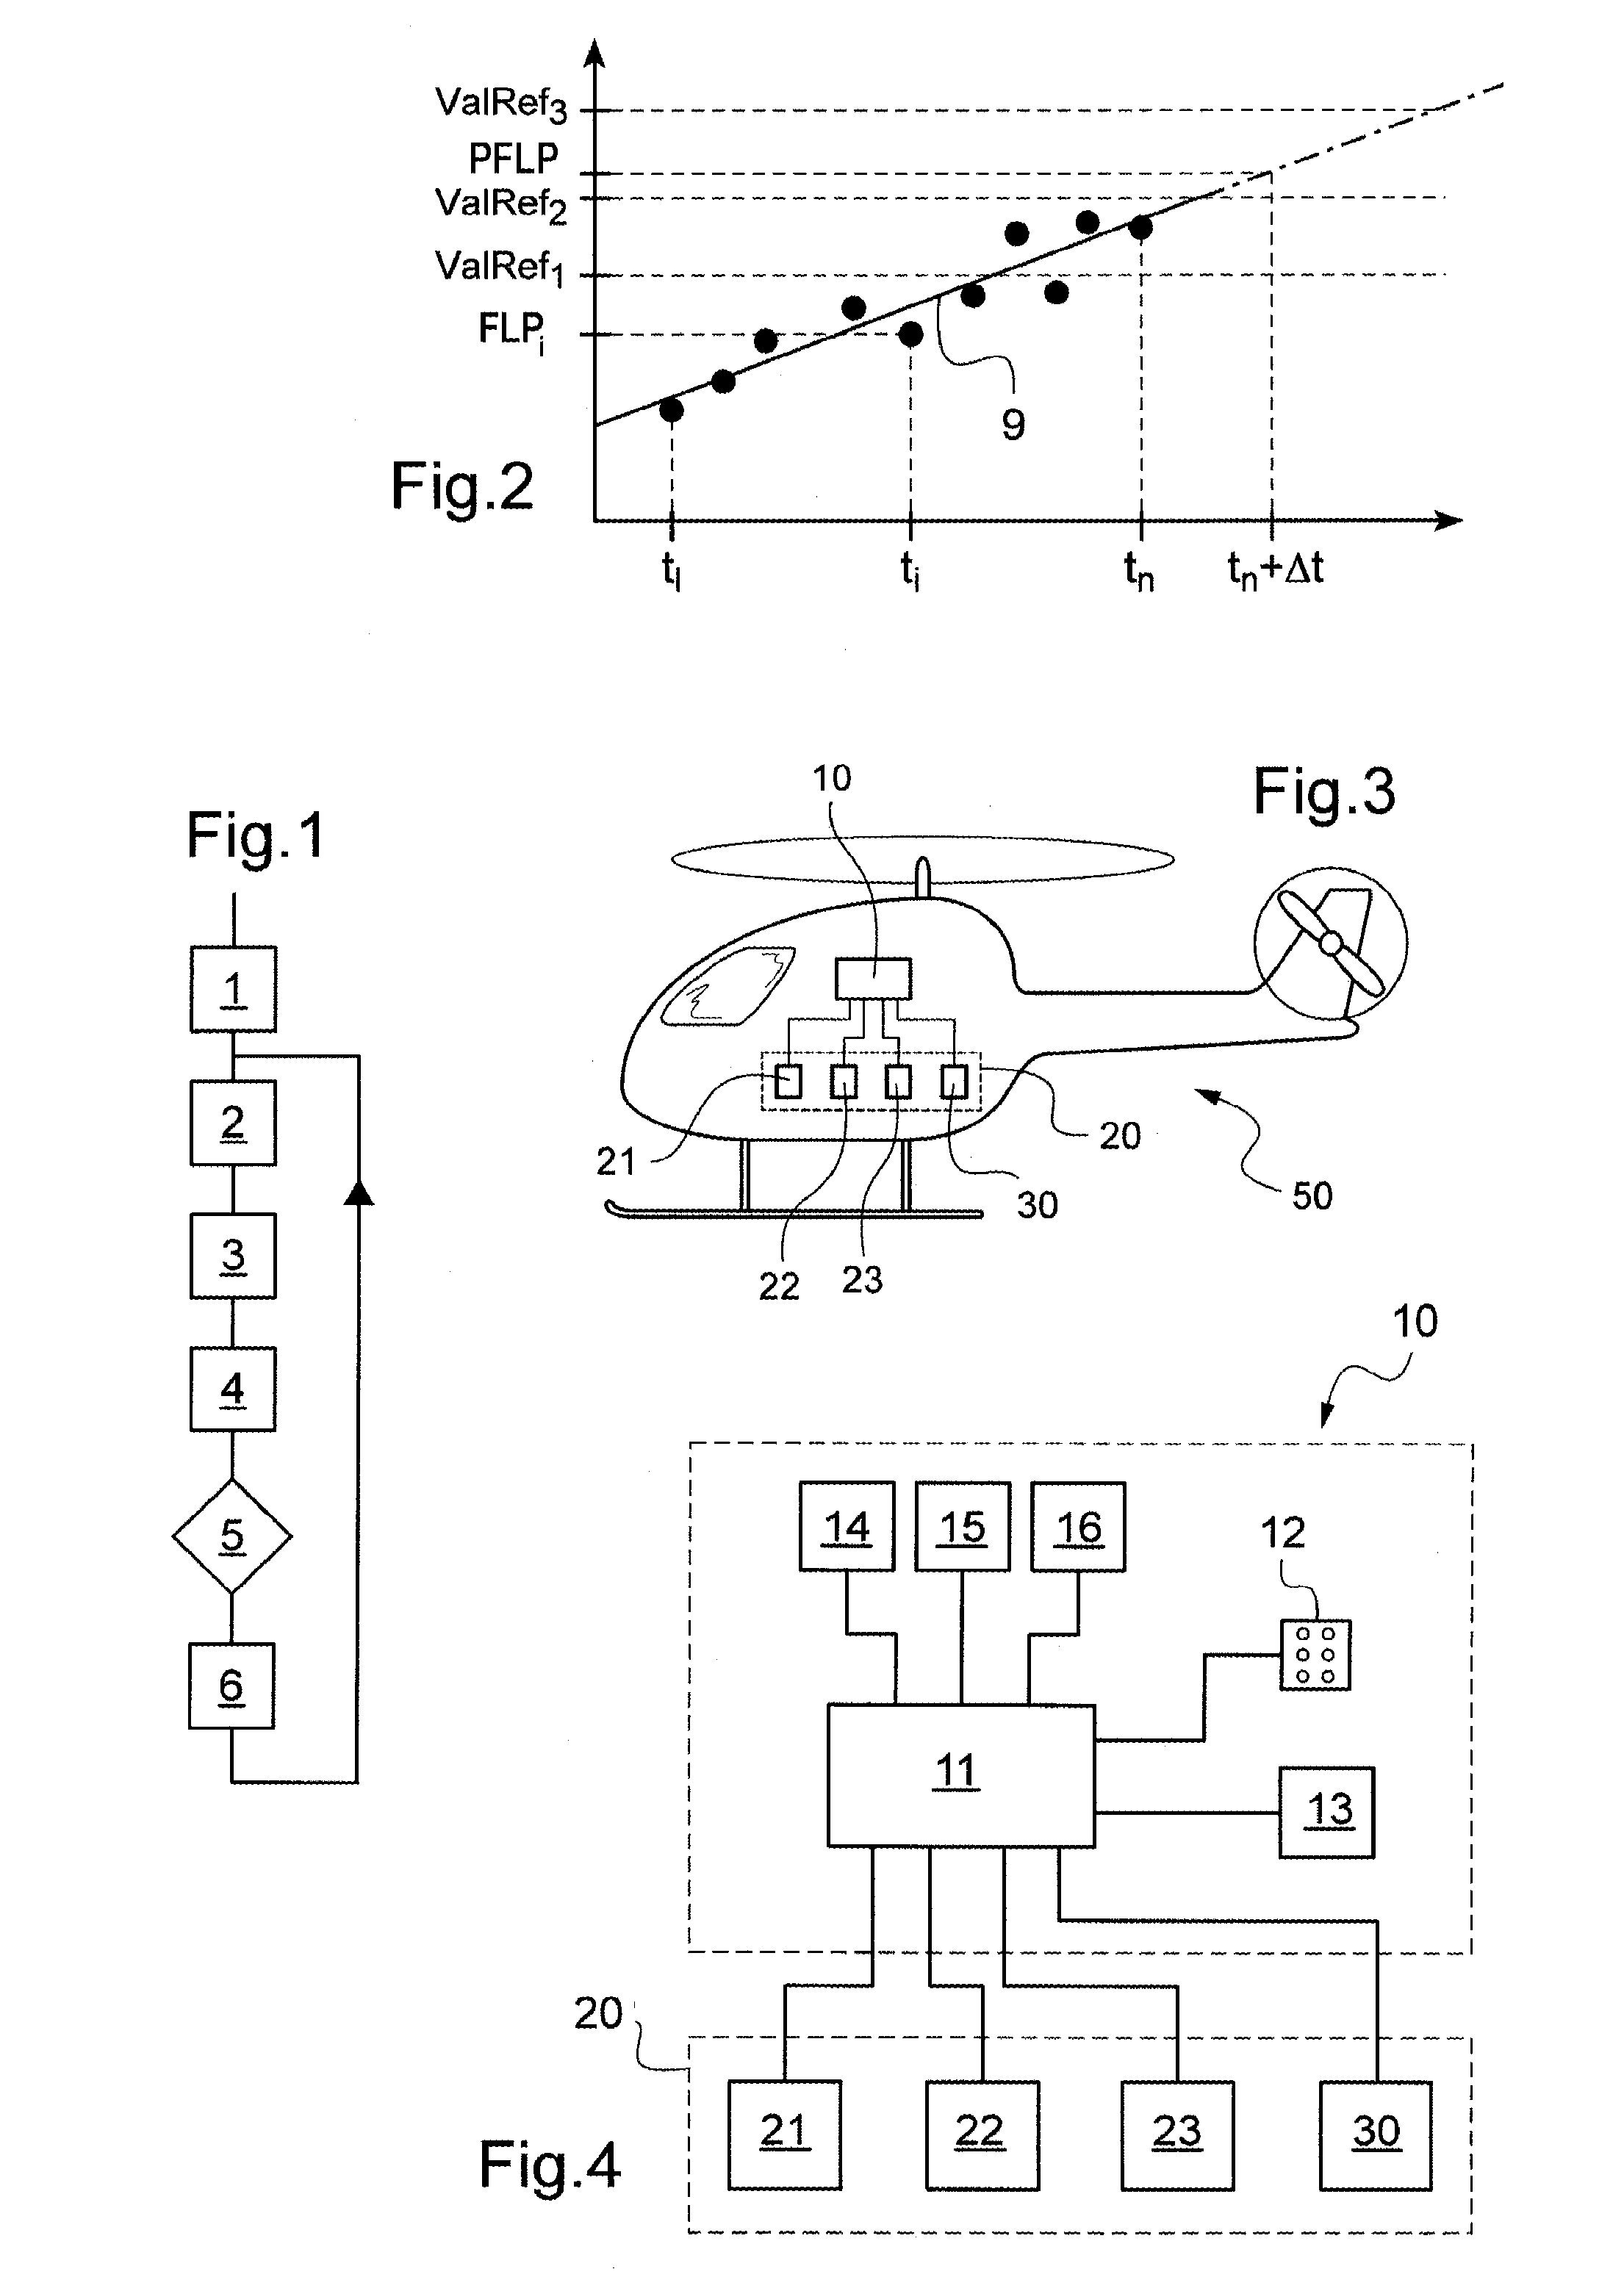 Method and a device for adapting the man-machine interface of an aircraft depending on the level of the pilot's functional state